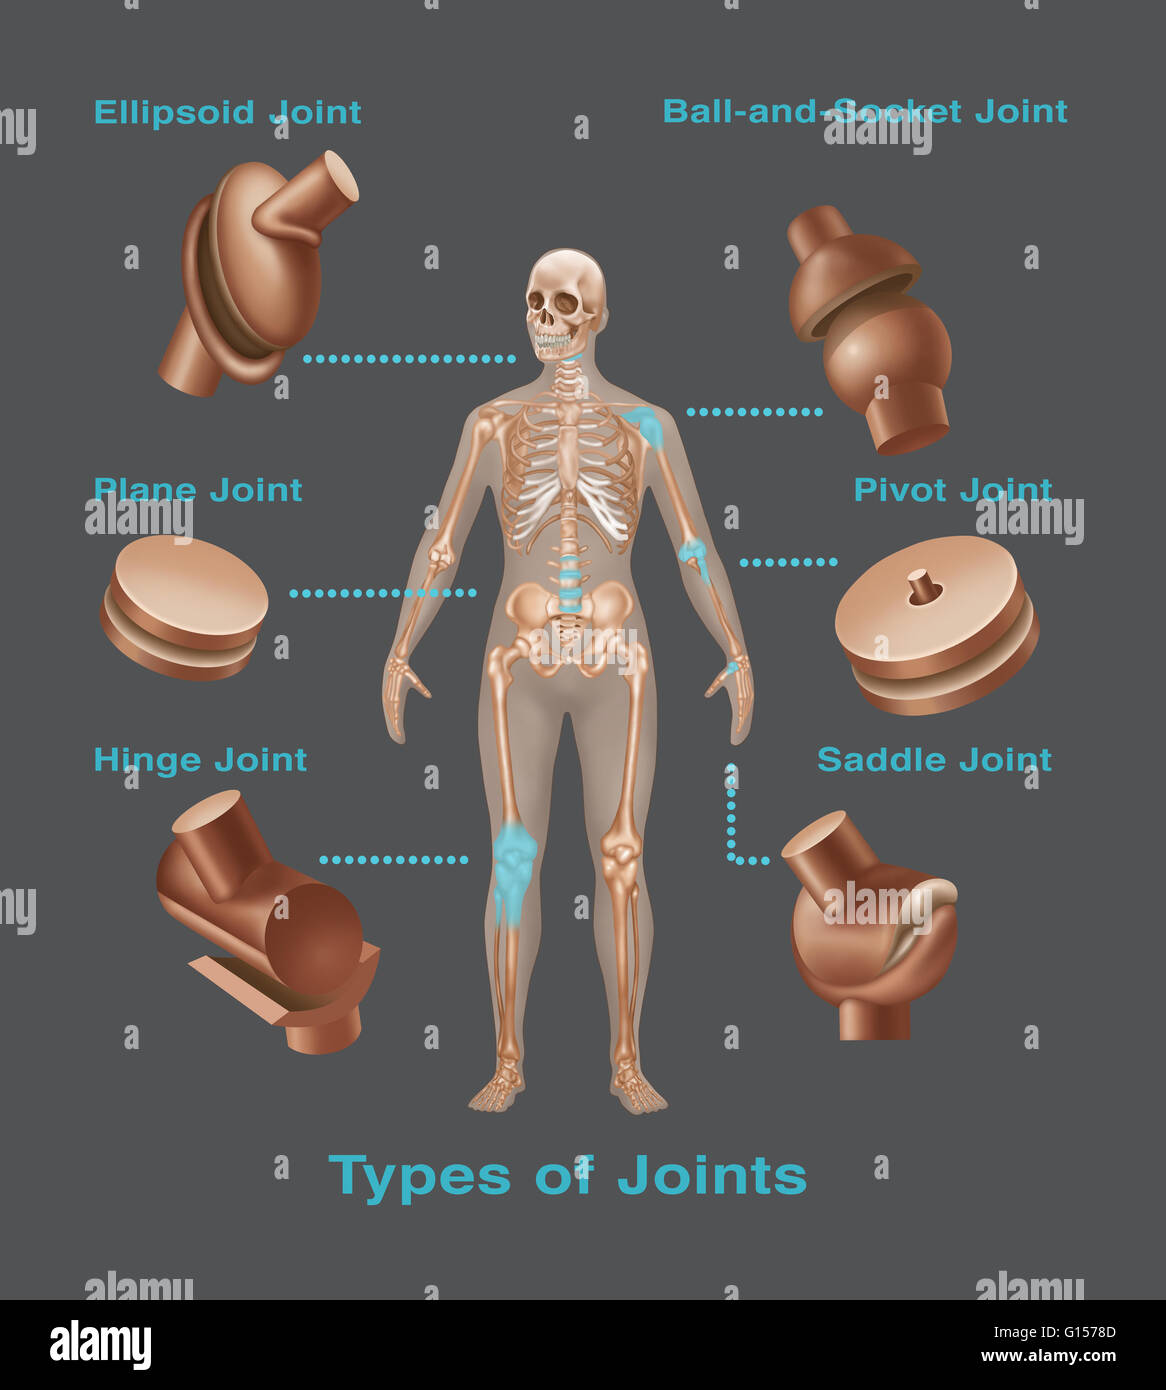 Joint replacements in the human body. Types of joint replacements  include ball and socket joint, pivot joint, saddle joint, hinge joint, plant joint and ellipsoid joint. Stock Photo